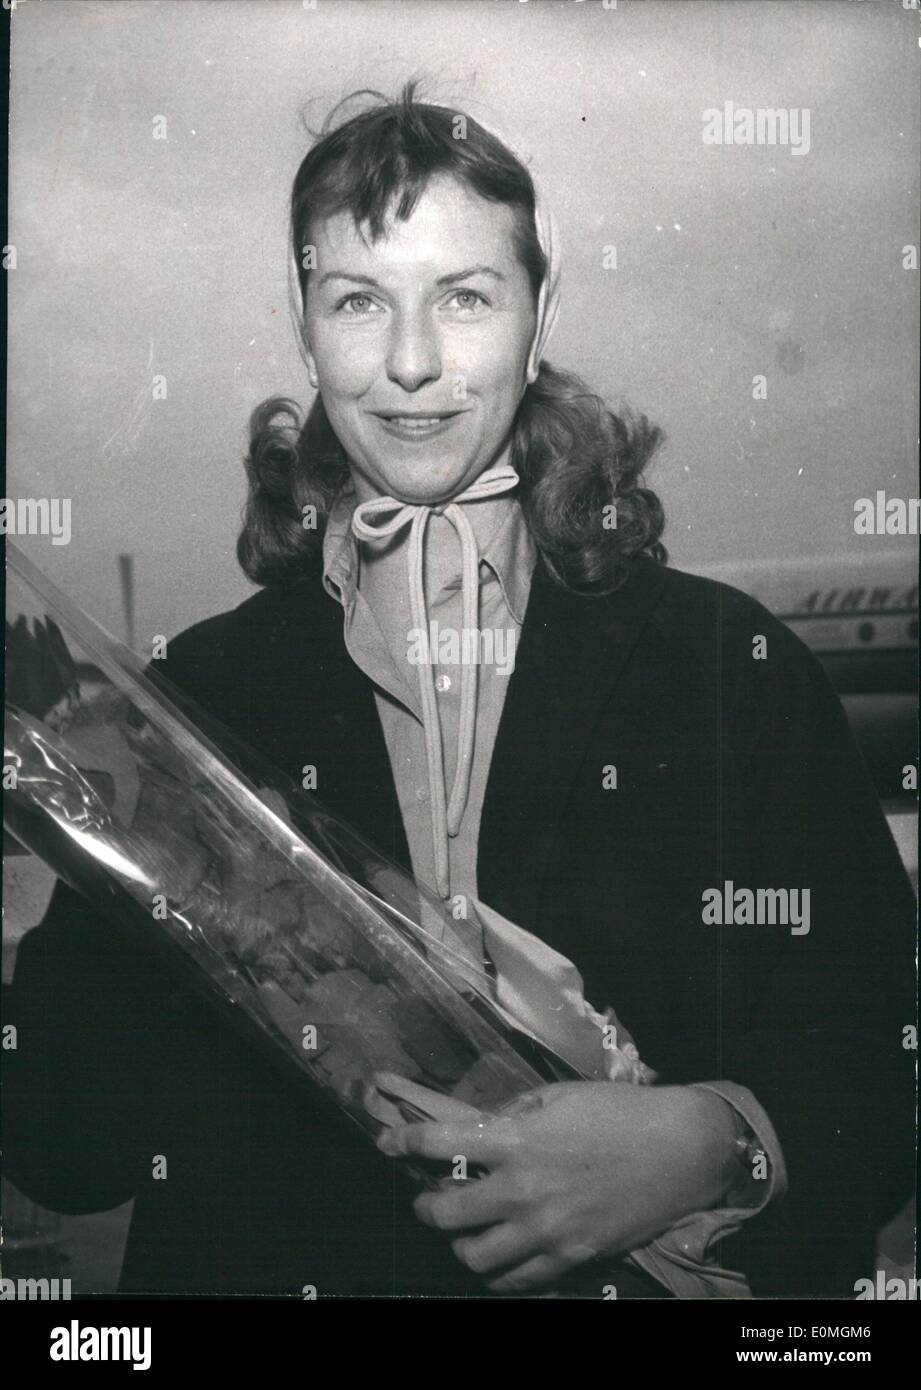 Apr. 04, 1955 - Betsy Balir at Cannes Cine Festival.: Betsy Blair Photographed on arrival to Orly airport, Paris, today. she is Stock Photo